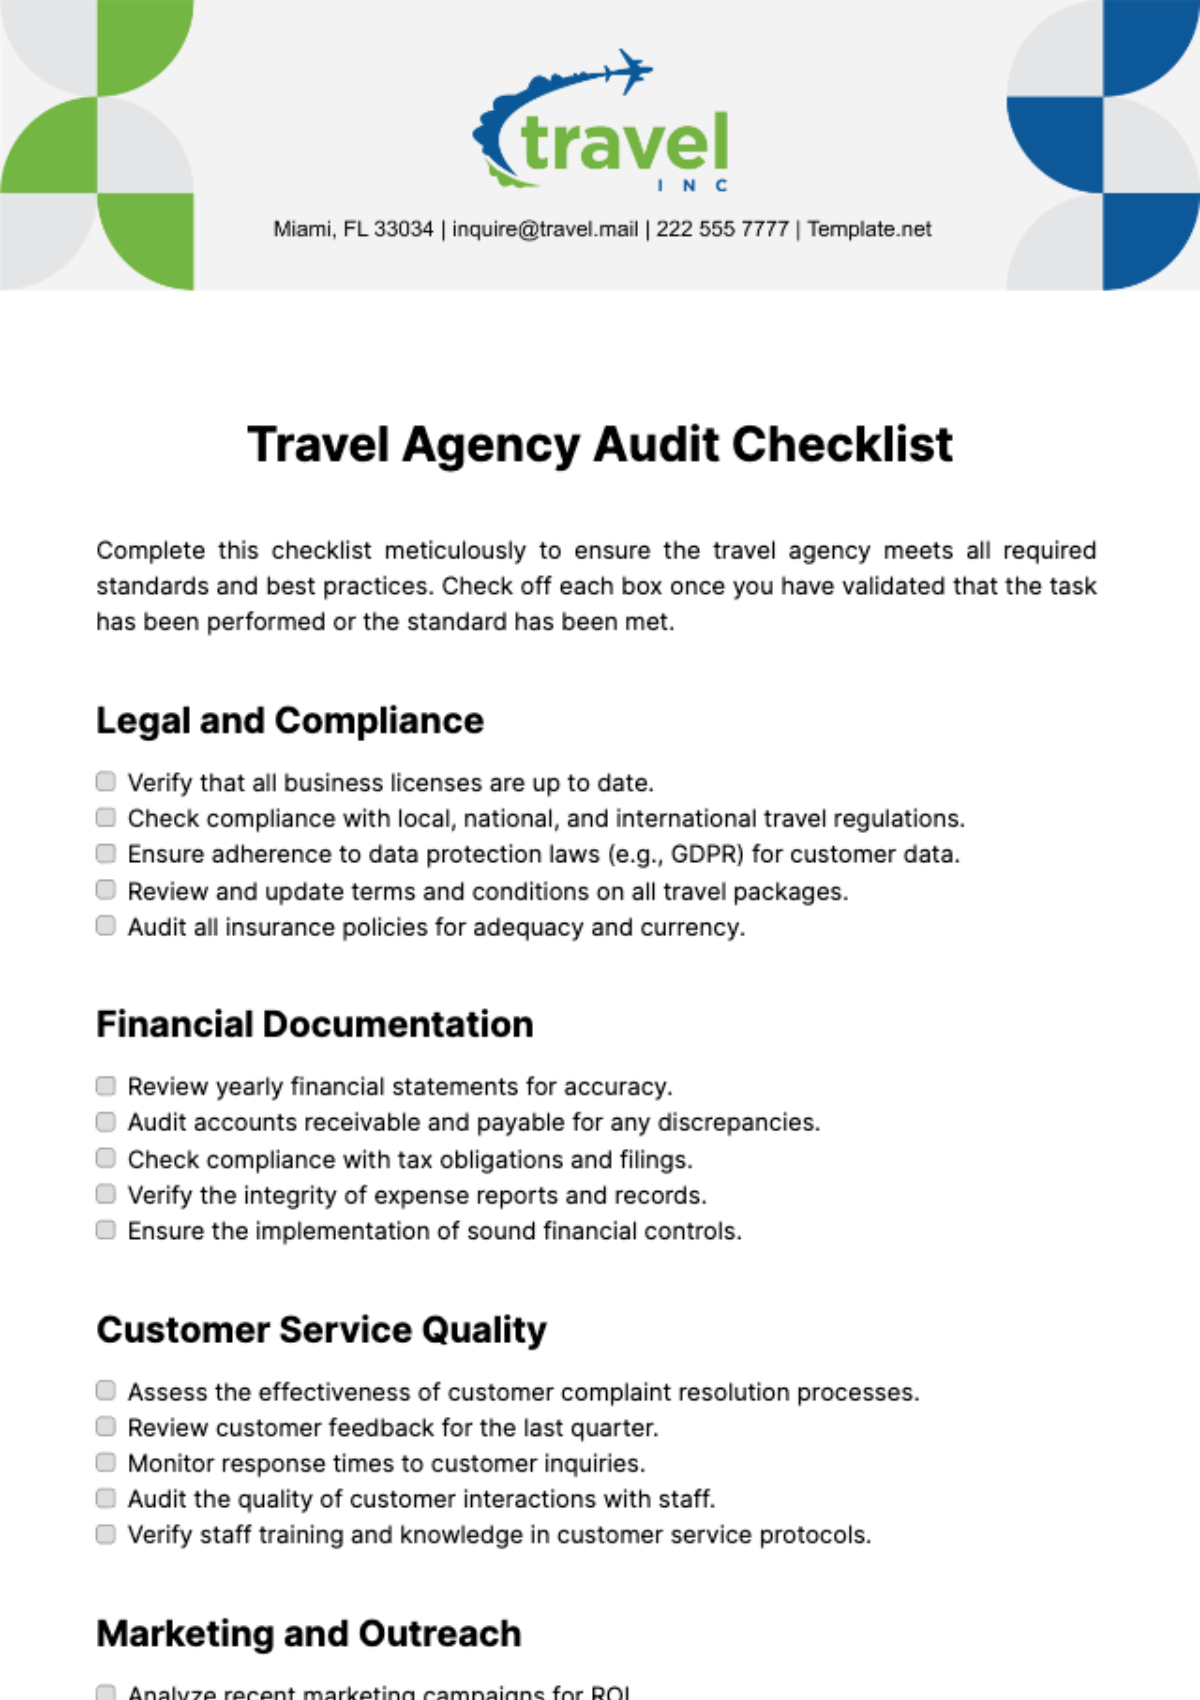 Free Travel Agency Audit Checklist Template